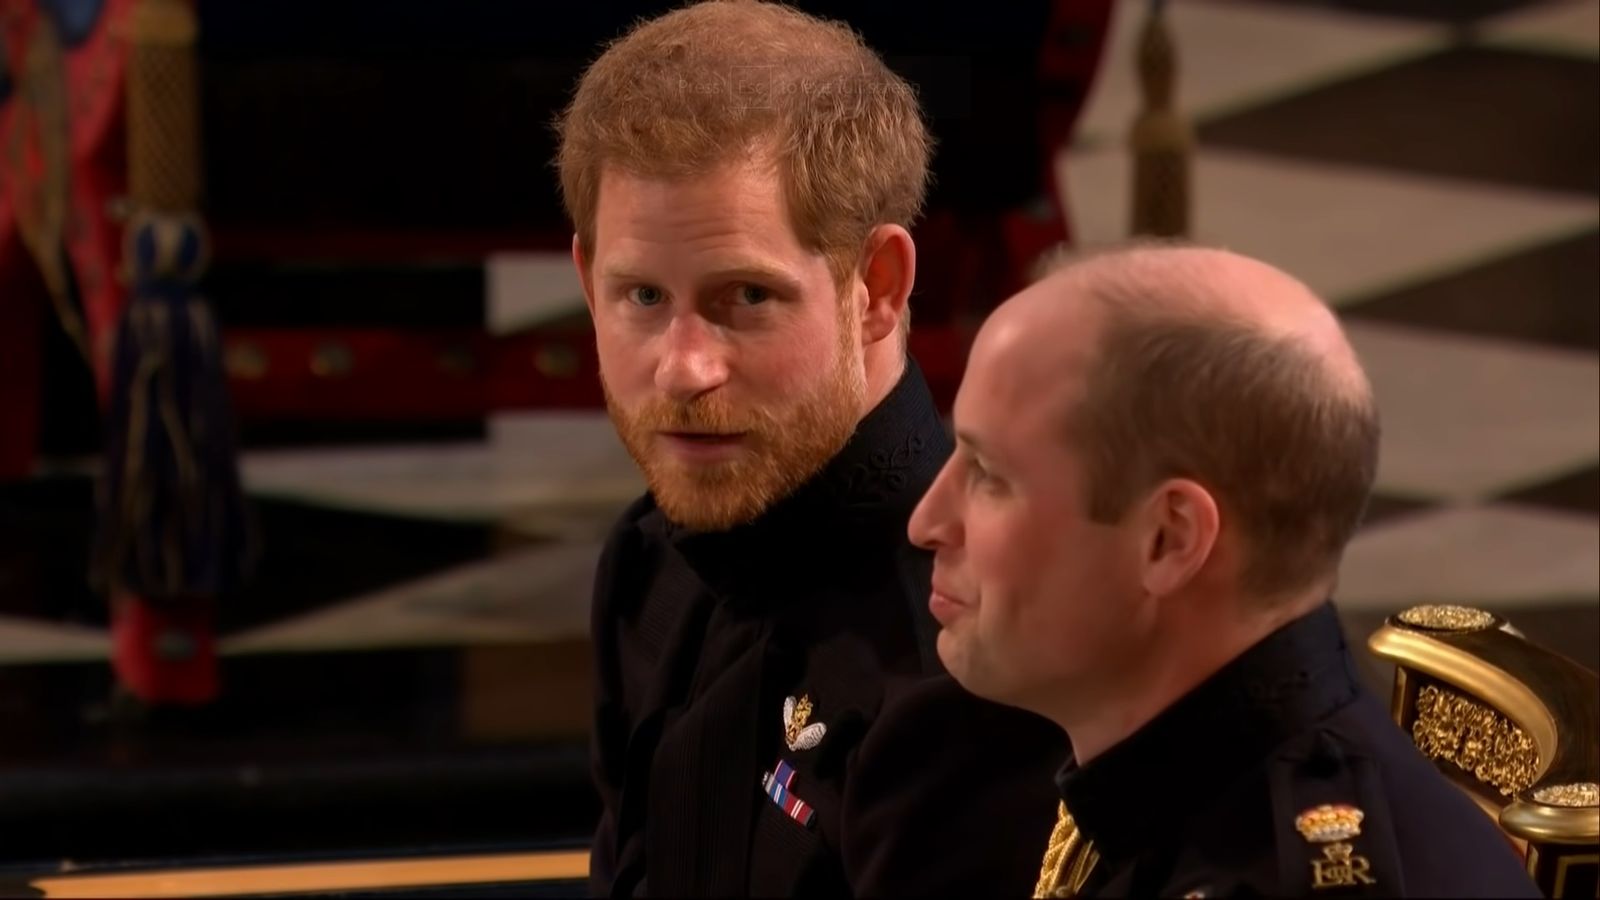 prince-harry-hilariously-revealed-the-very-moment-he-figured-prince-william-was-serious-about-kate-middleton-prince-princess-of-wales-touched-by-dukes-best-man-speech